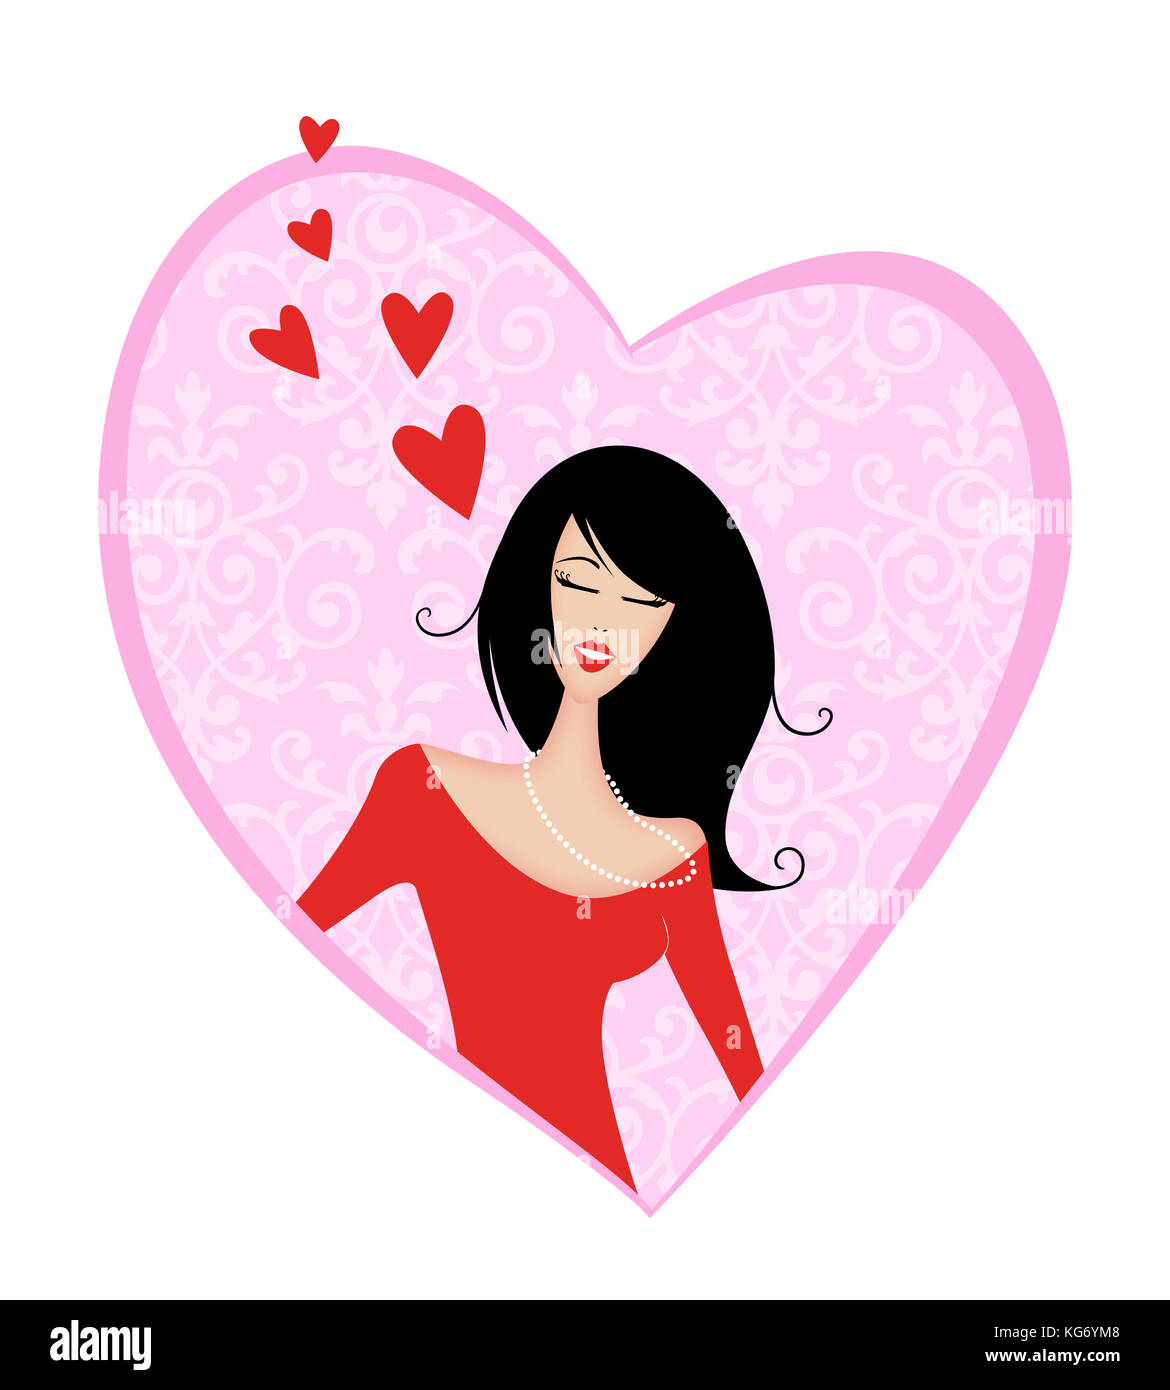 Cute young woman inside a Valentine heart with small hearts floating up Stock Photo